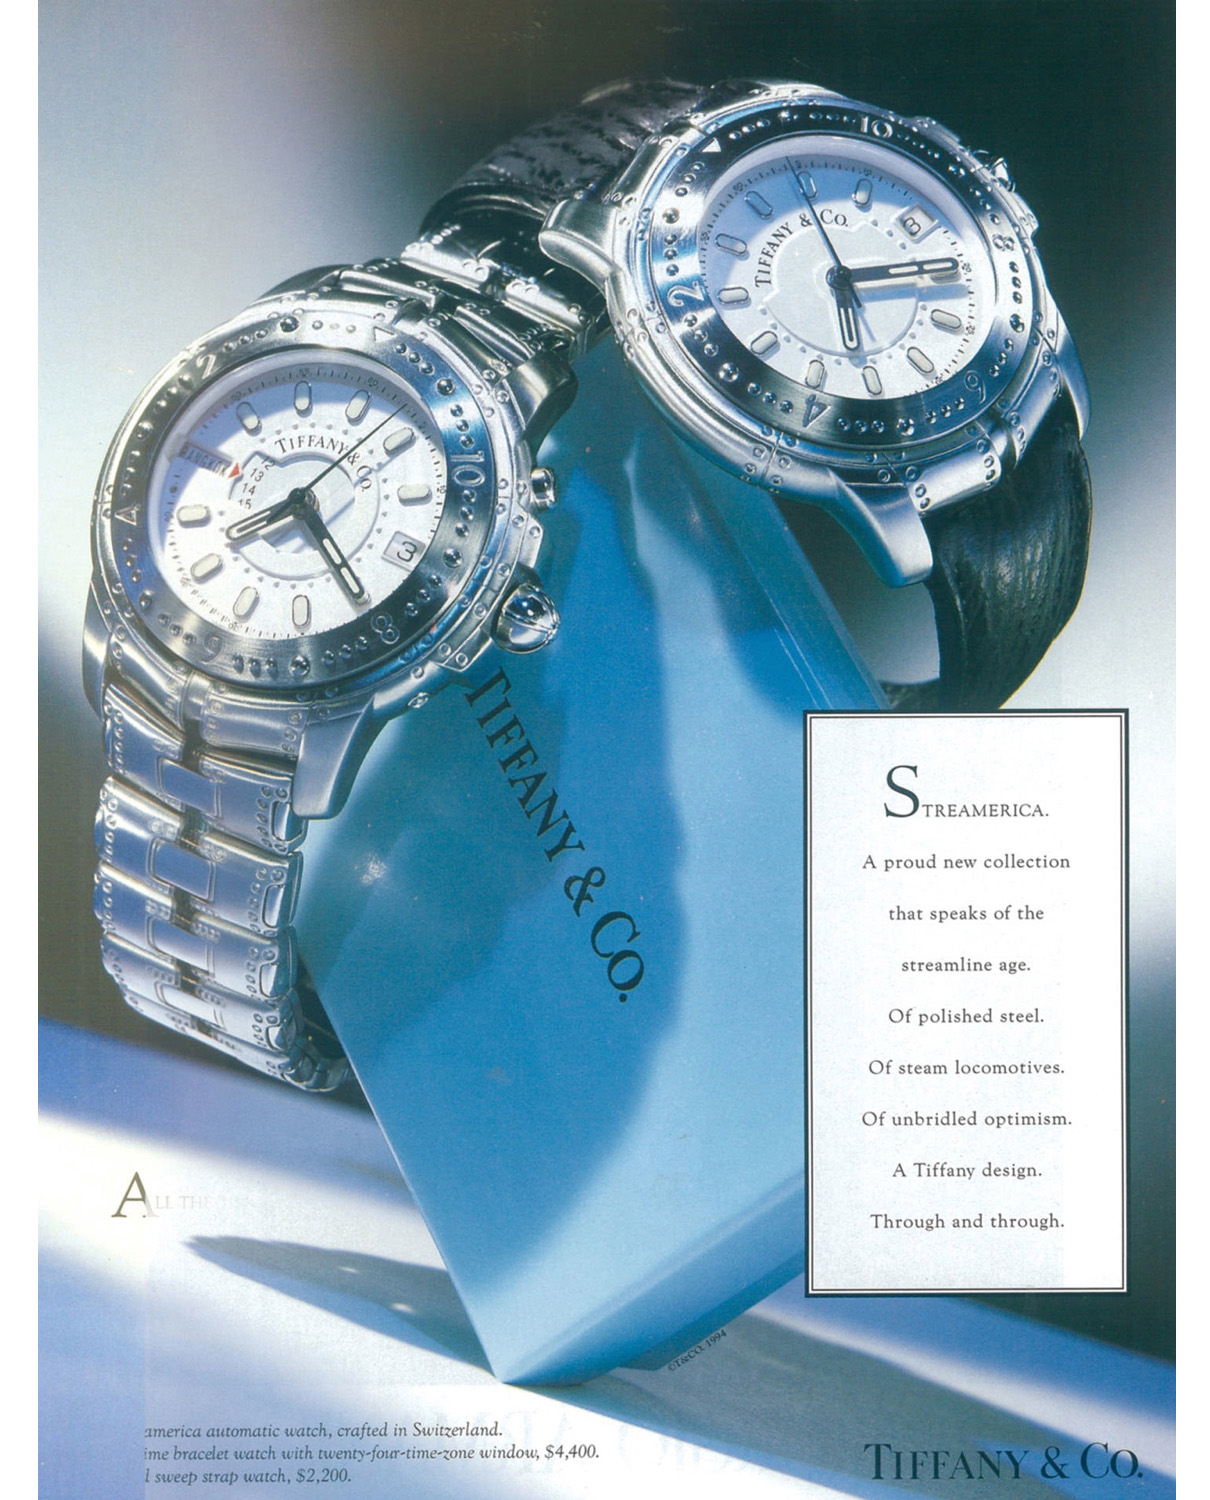 Original advertisement 1993 from Tiffany & Co. Streamerica Stainless steel World Time Automatic Watch, and Automatic Chronometer with leather band.